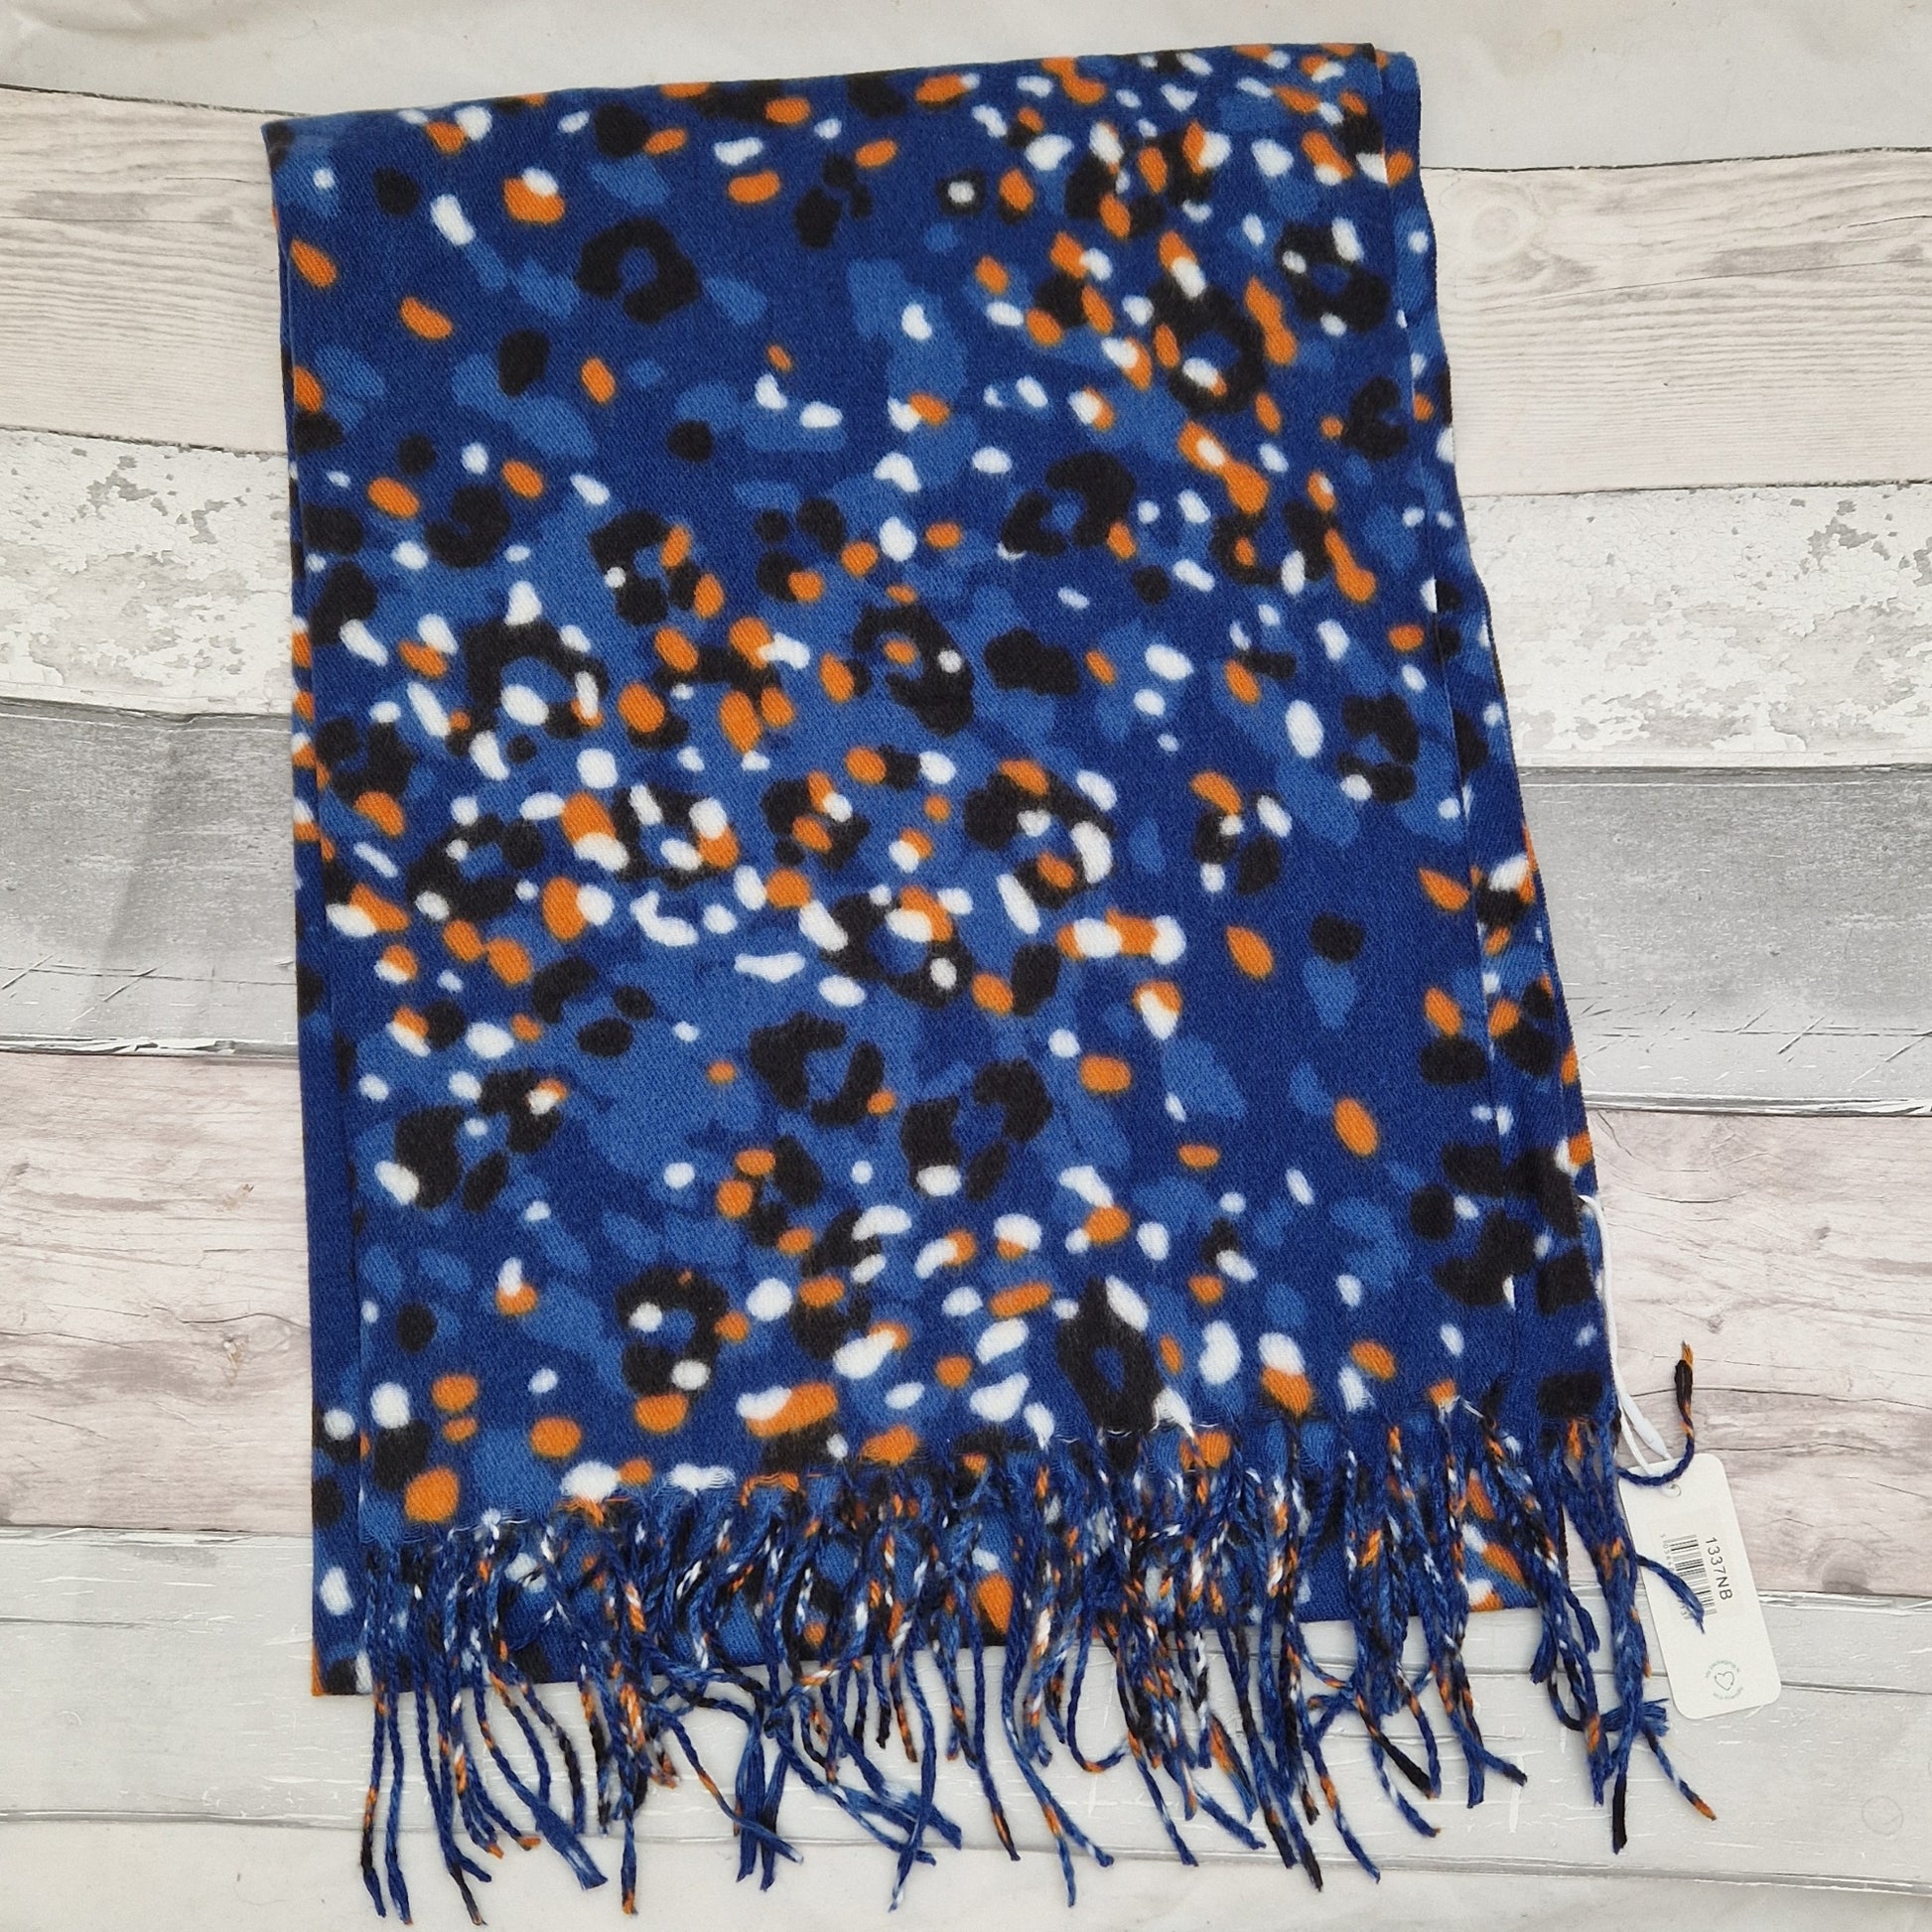 Electric blue scarf with a black leopard print overlaid with spots of orange and white.